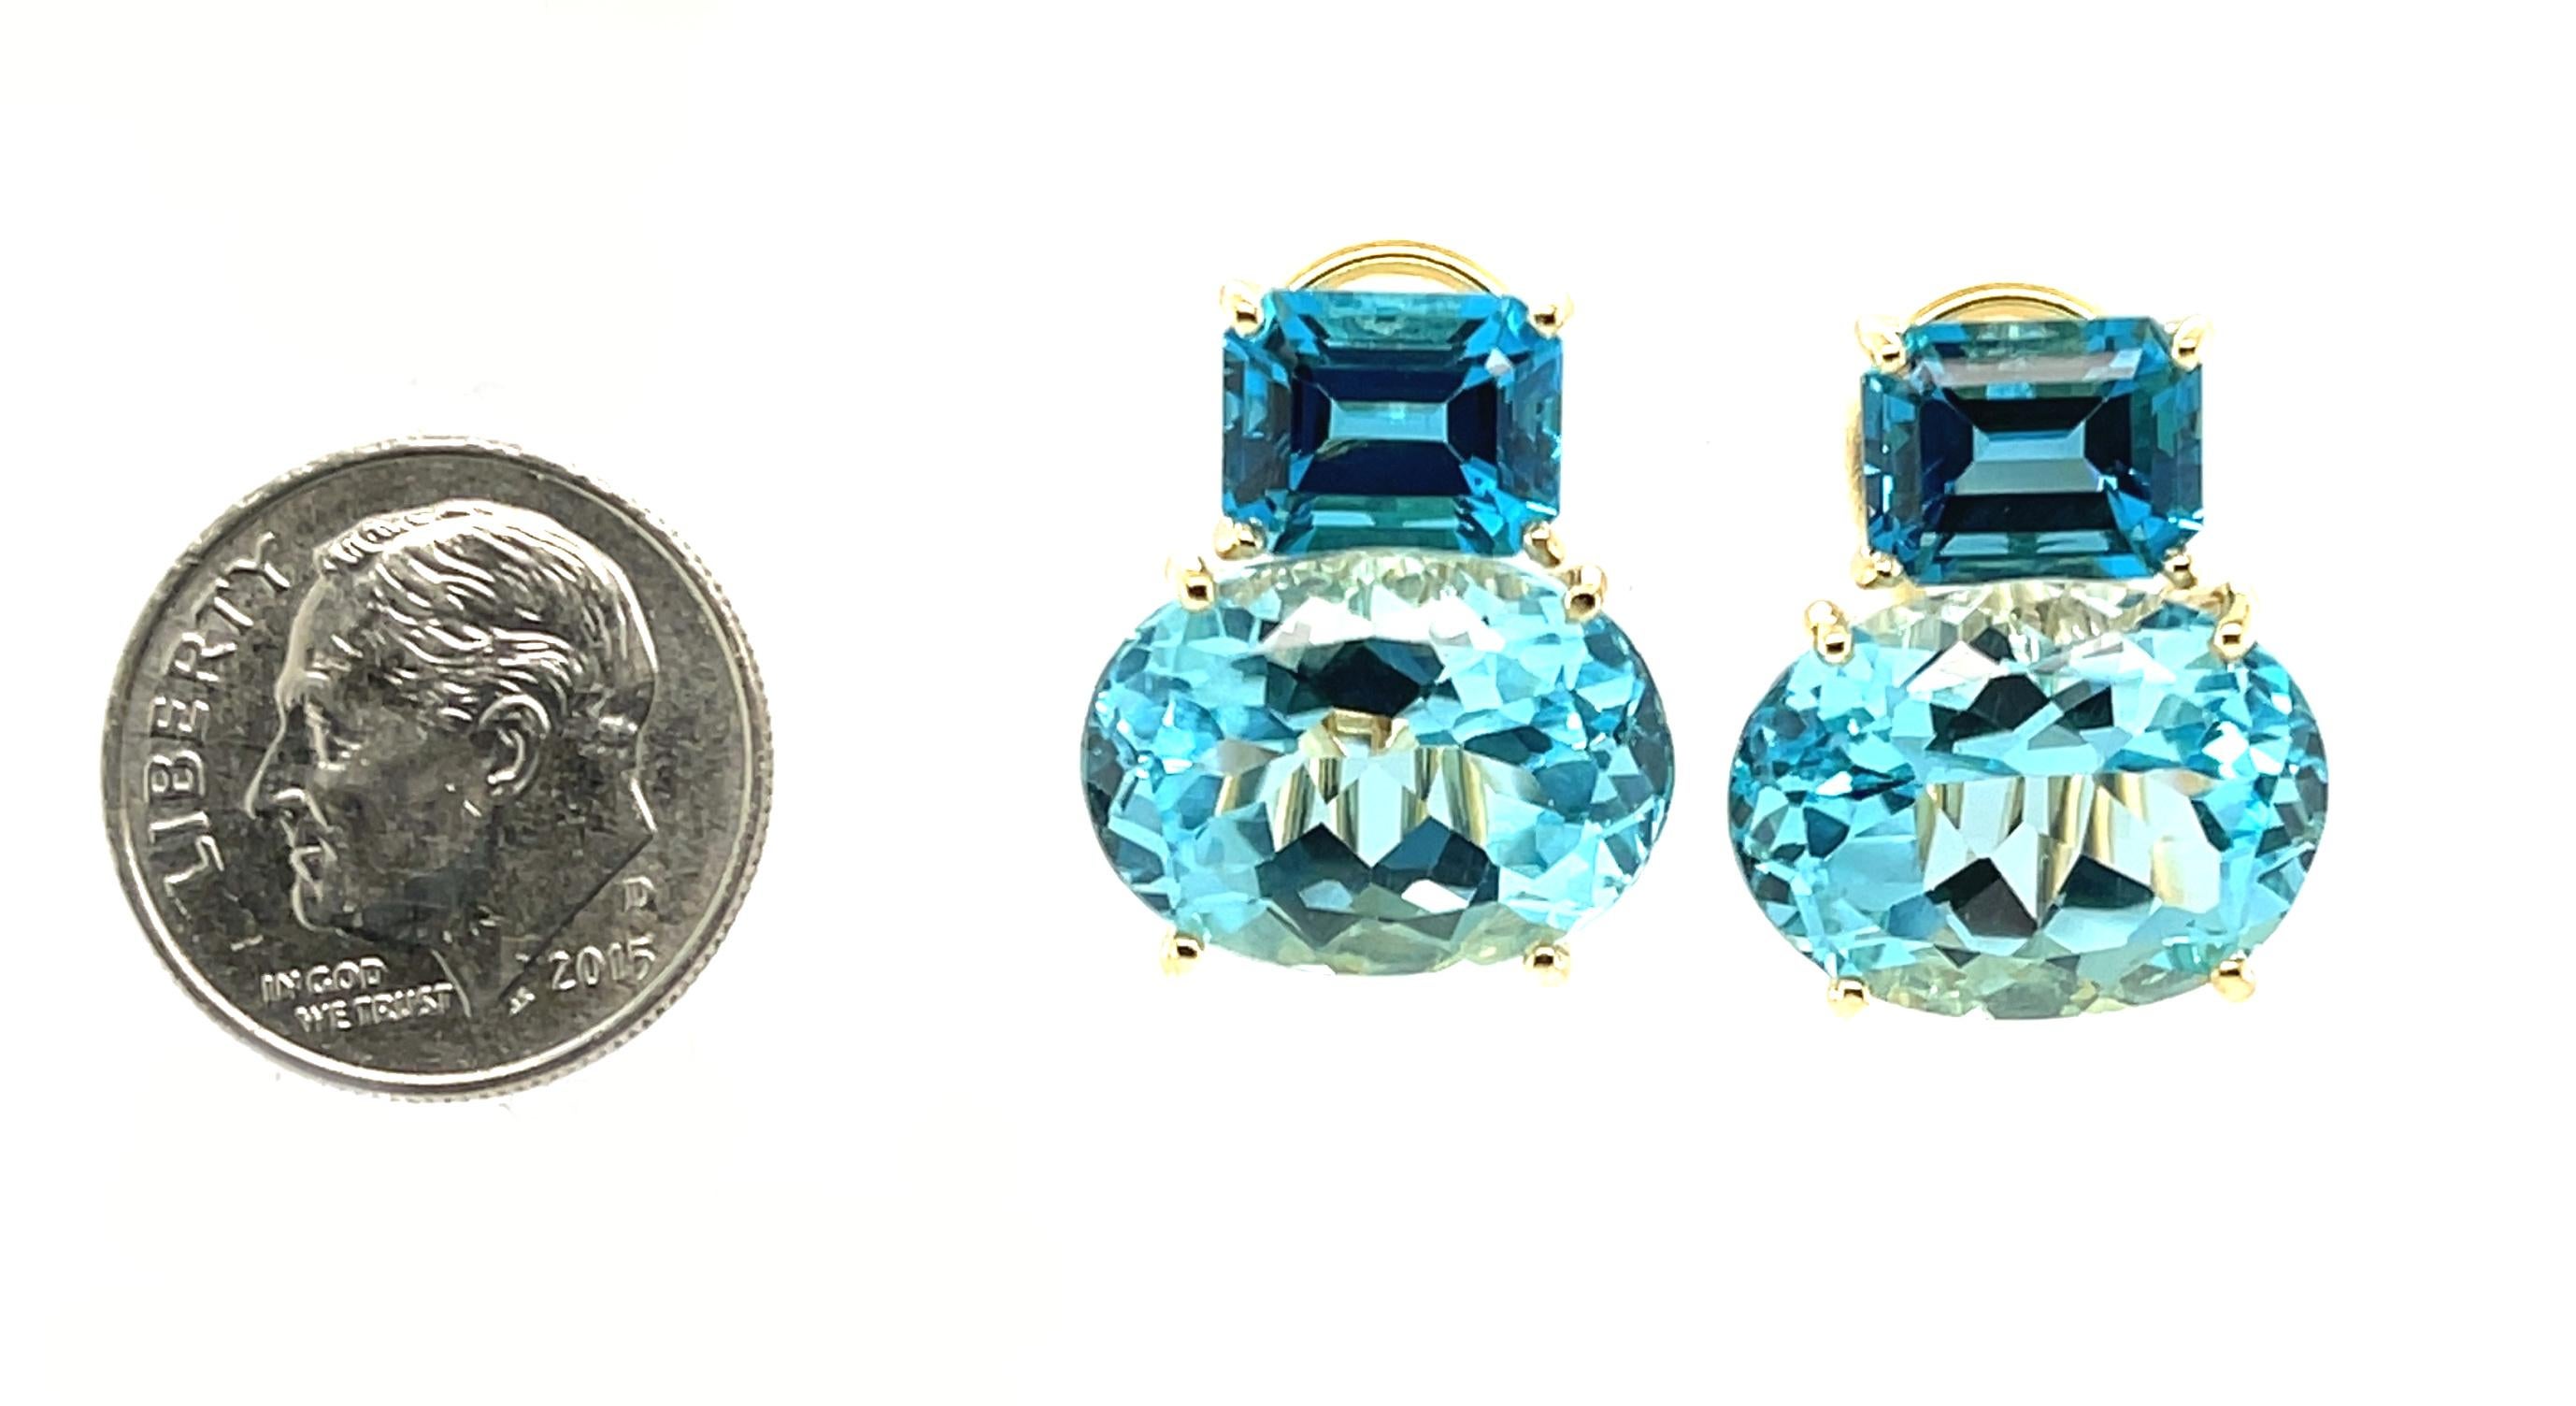 These stunning earrings feature bright, sparkling Swiss blue topaz ovals paired with deep London blue topaz emerald-cuts in a gorgeous color block combination of eye-catching shapes and sizes! Measuring 3/4 inch in length, these large gemstone